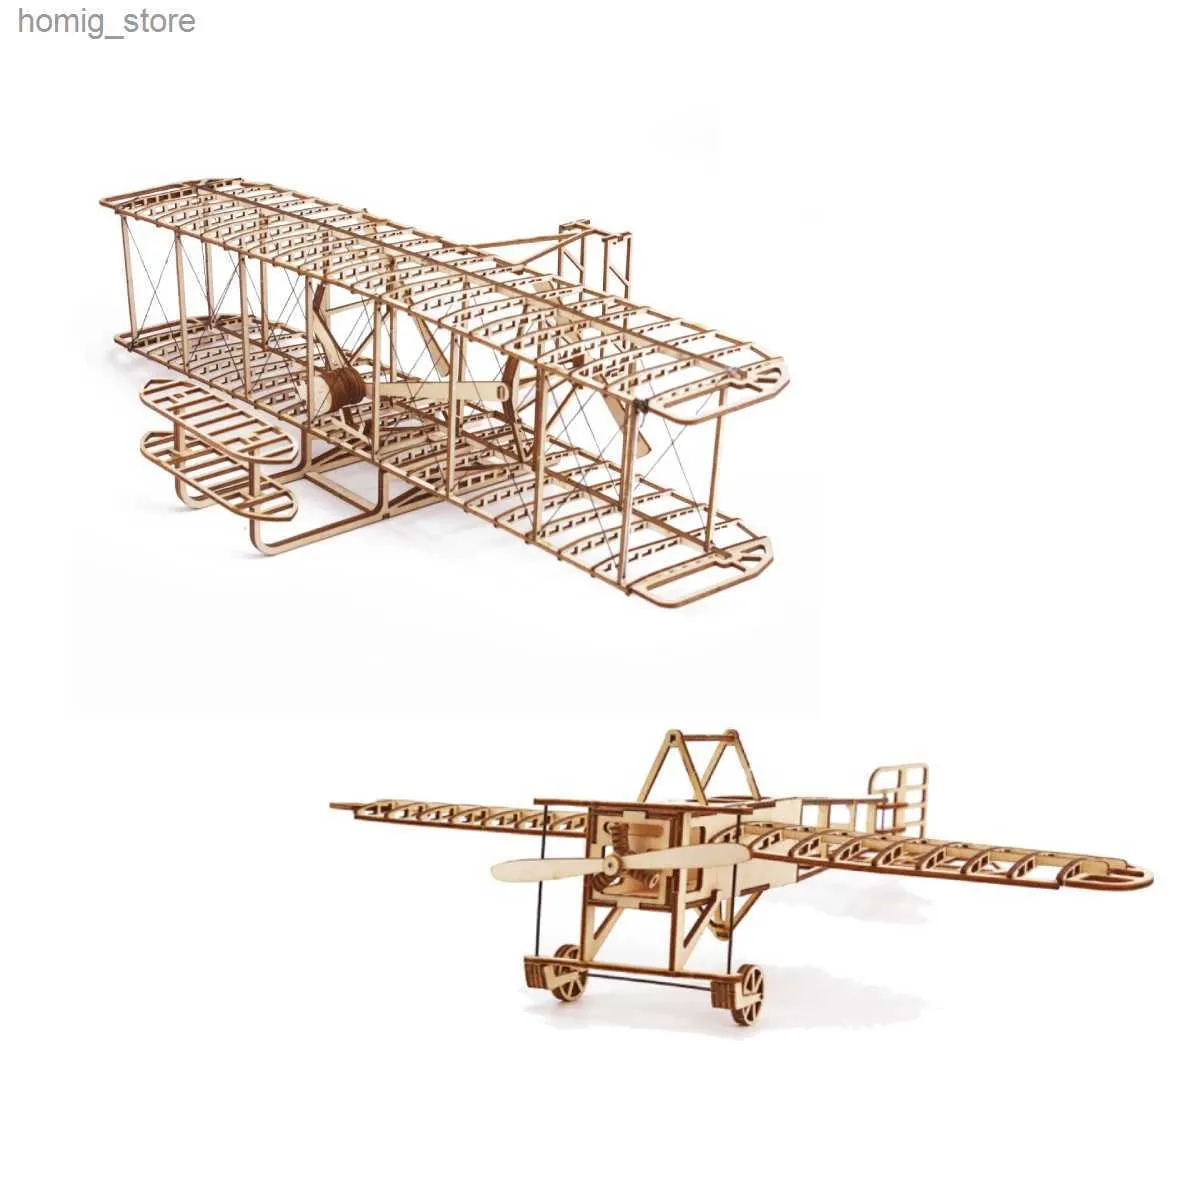 3D Puzzles 3d Aircraft Wooden Puzzles Kits Assemble Constructor Building Blocks Model DIY for Kids Breriot Wright Brothers Airplane Models Y240415